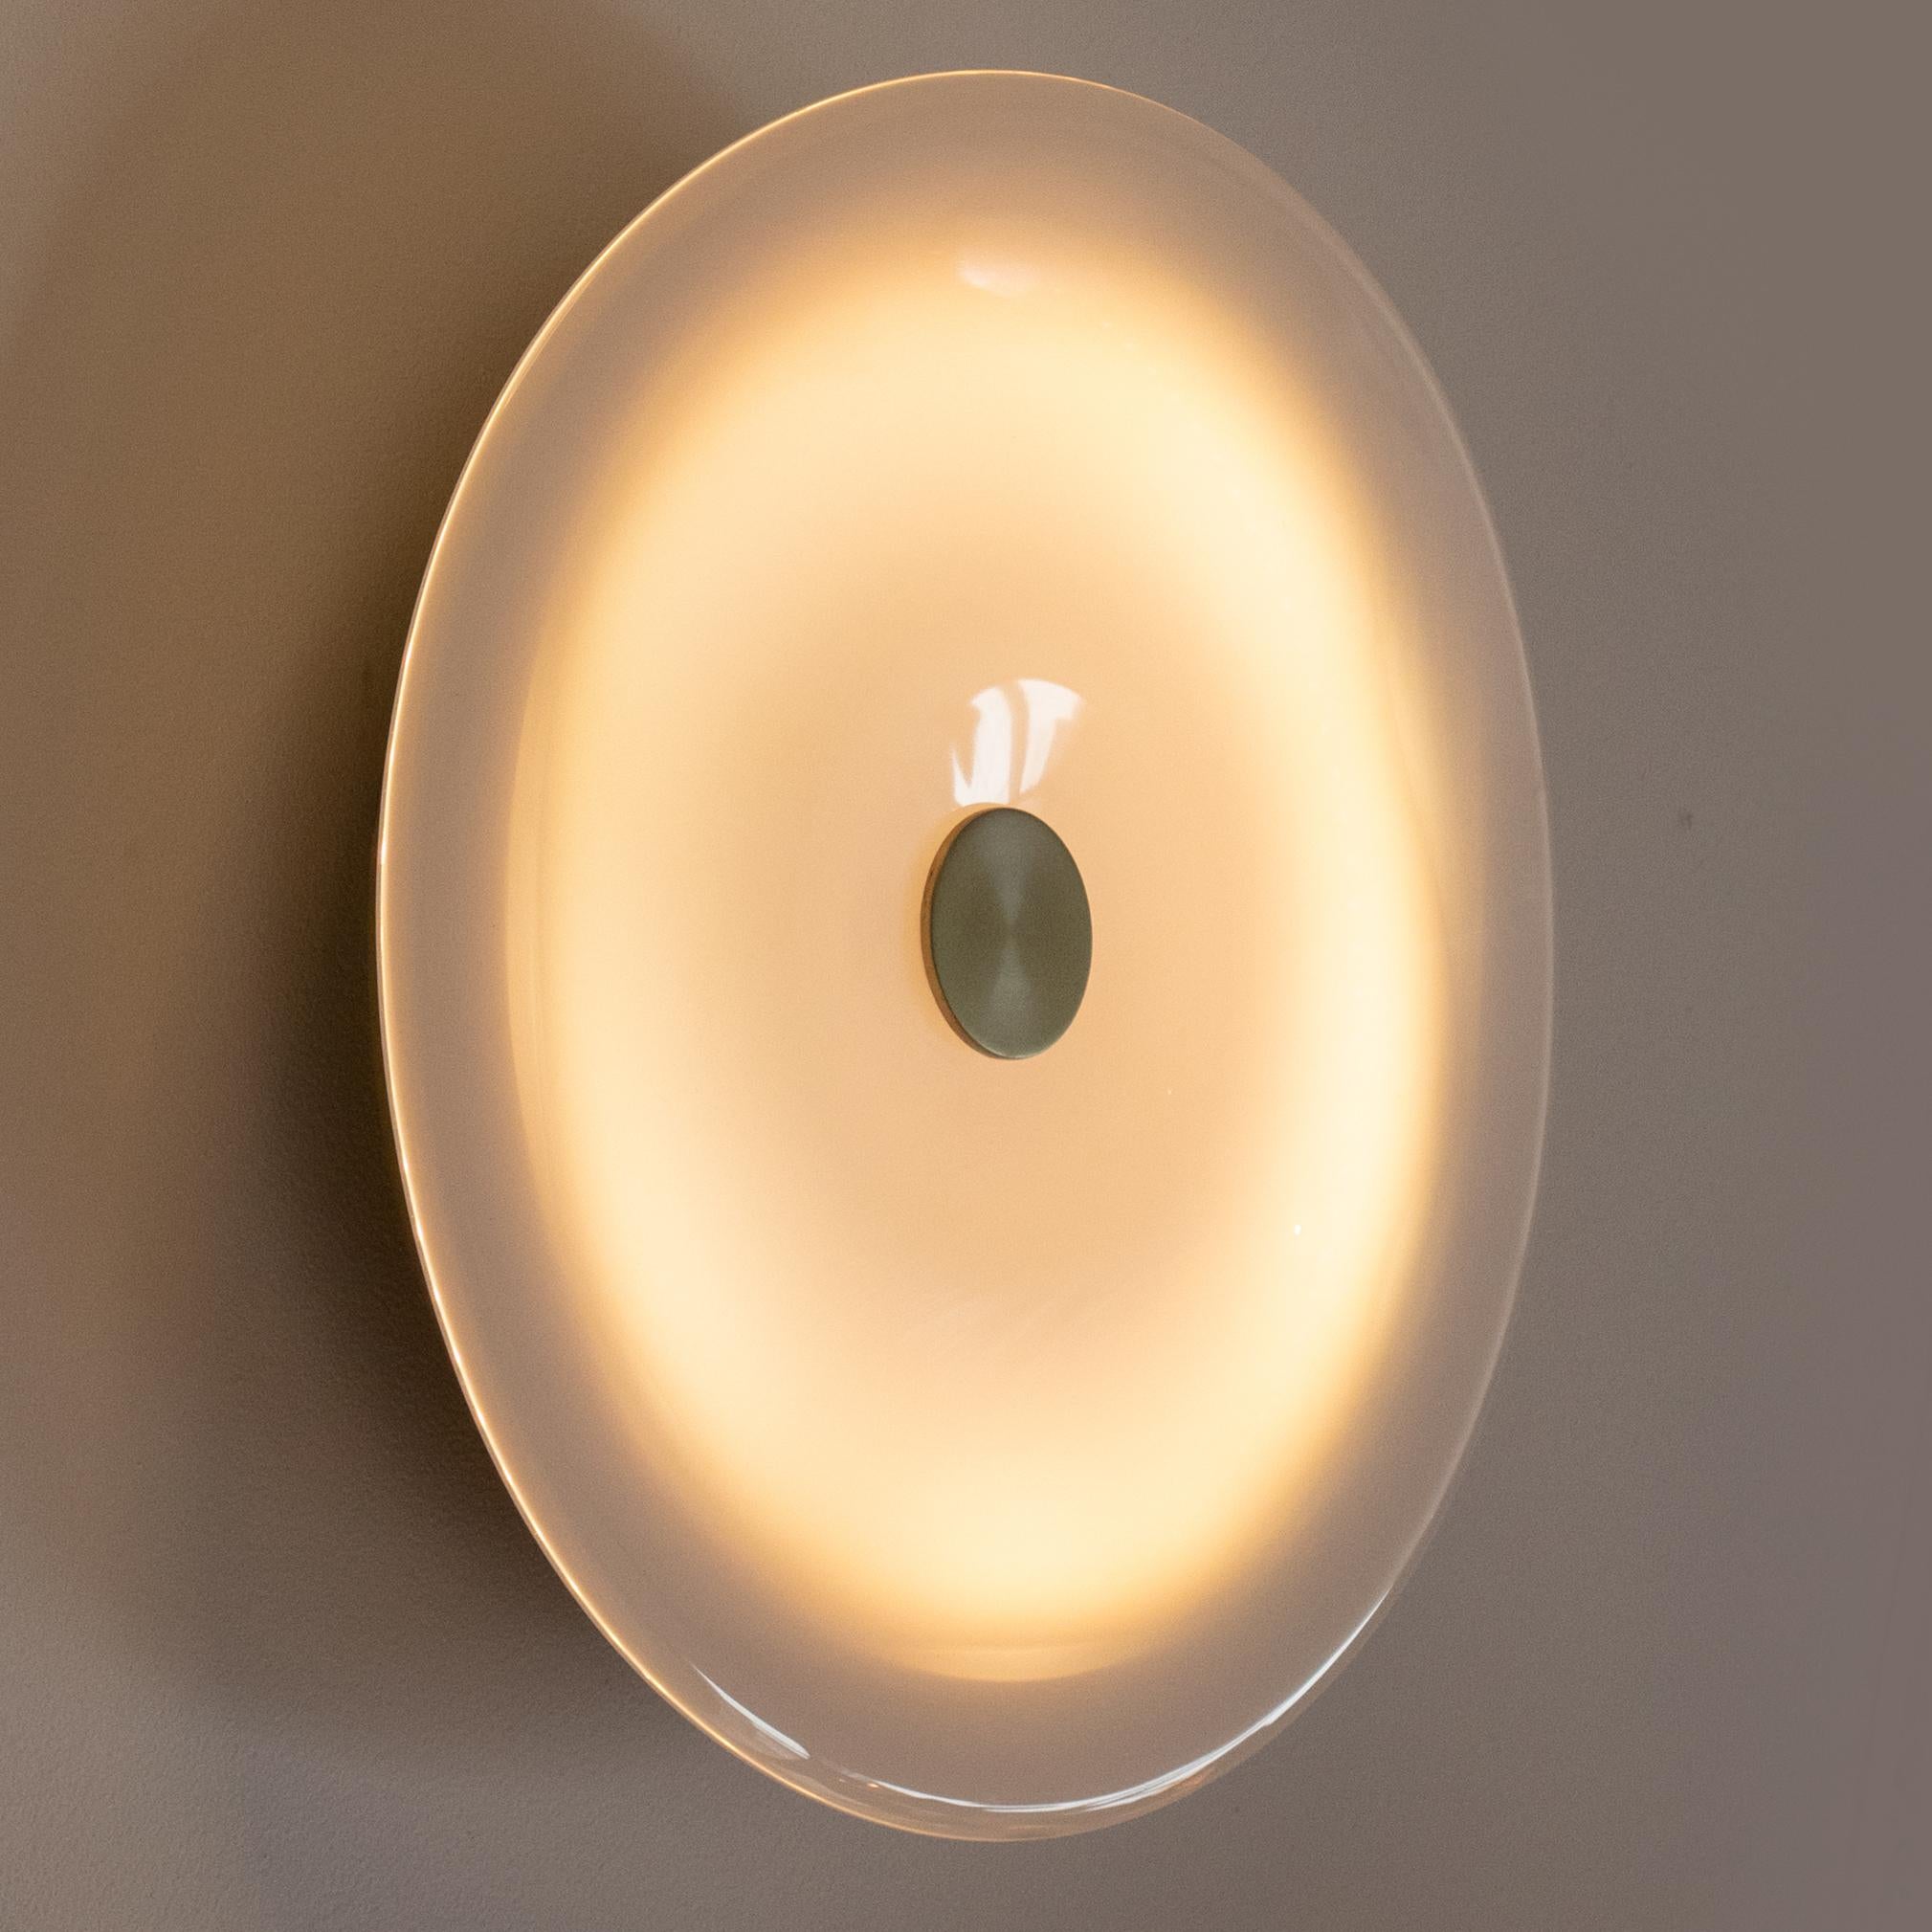 The LUNA wall sconce is built from cold rolled steel and features an undulated hand-blown glass disk diffuser. The glass disk is held in place by a solid brass ball on an articulating arm for adjustments. The sconce is back-lit with a warm white LED